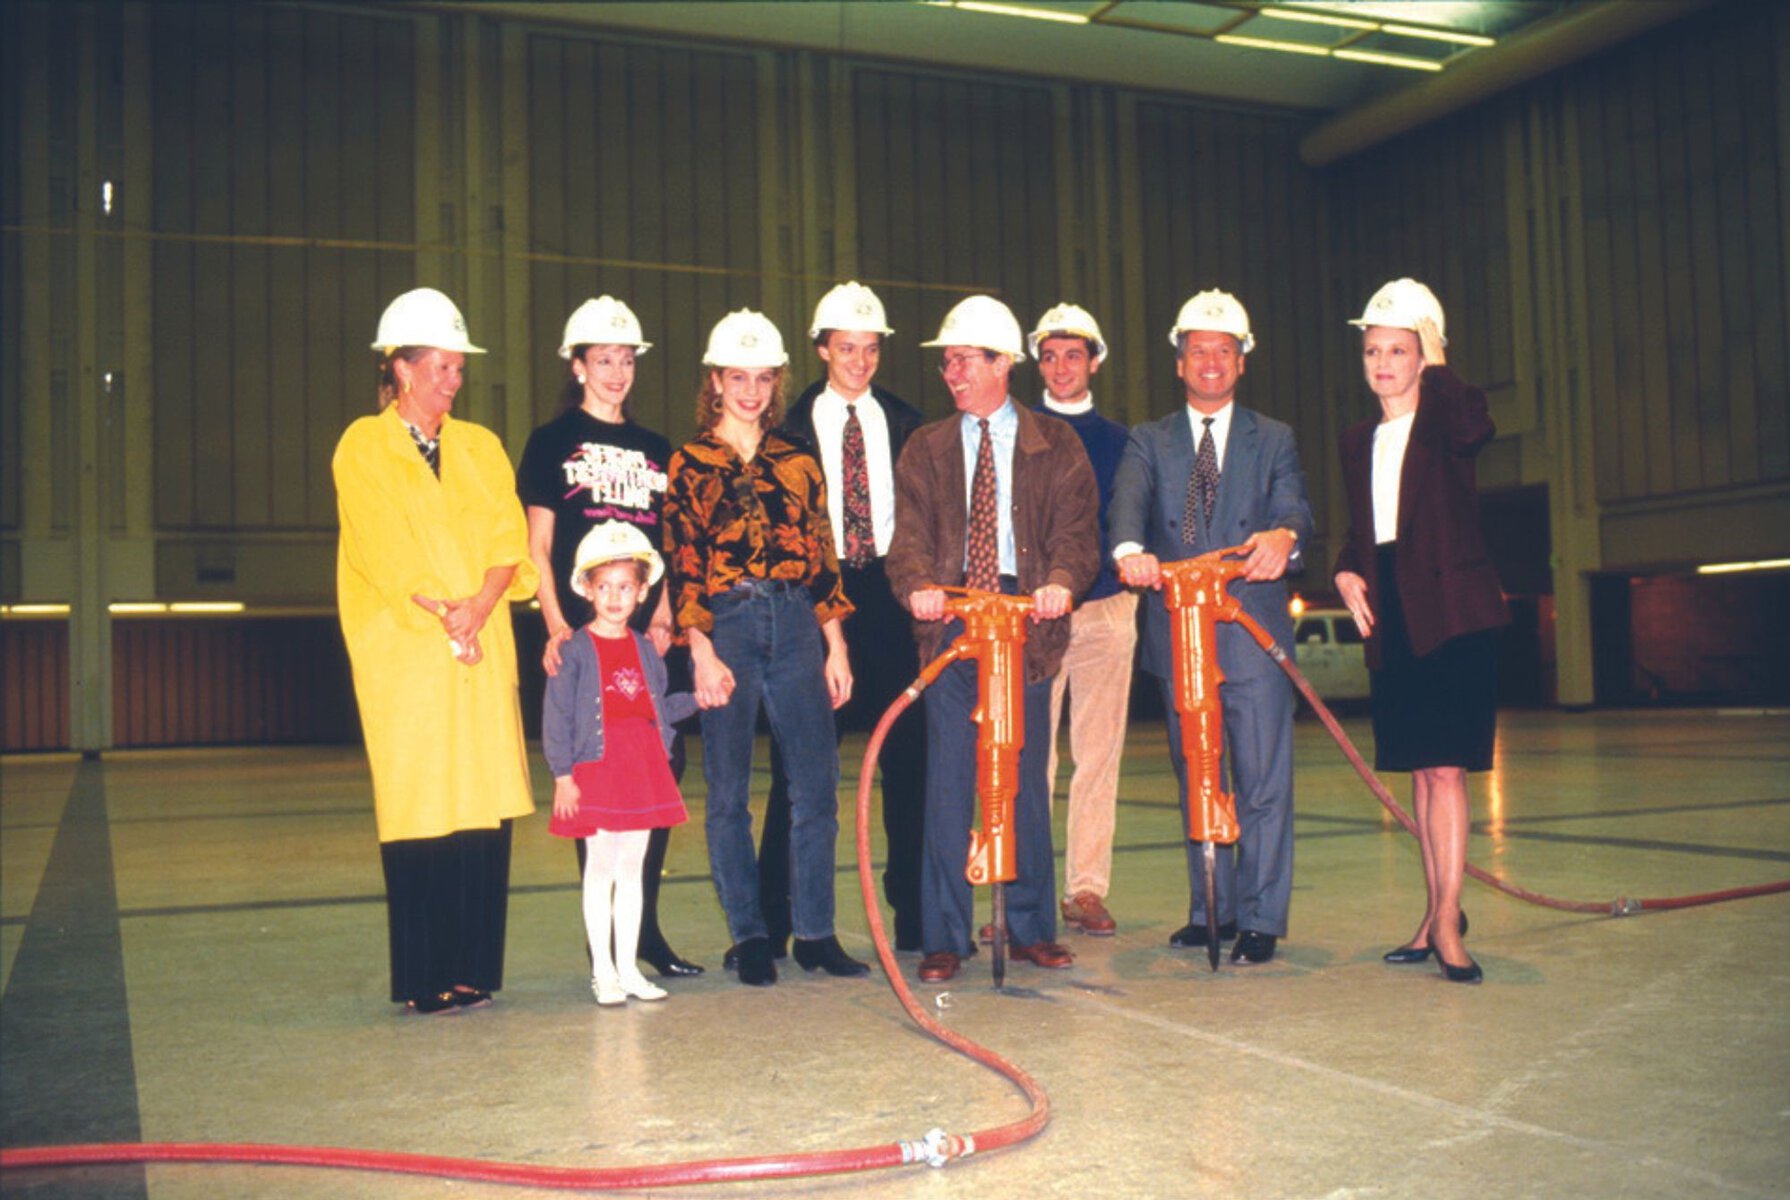 A group of PNB executives, board members, and dancers pose with construction hats and jack hammers during renovations at the Phelps Center.